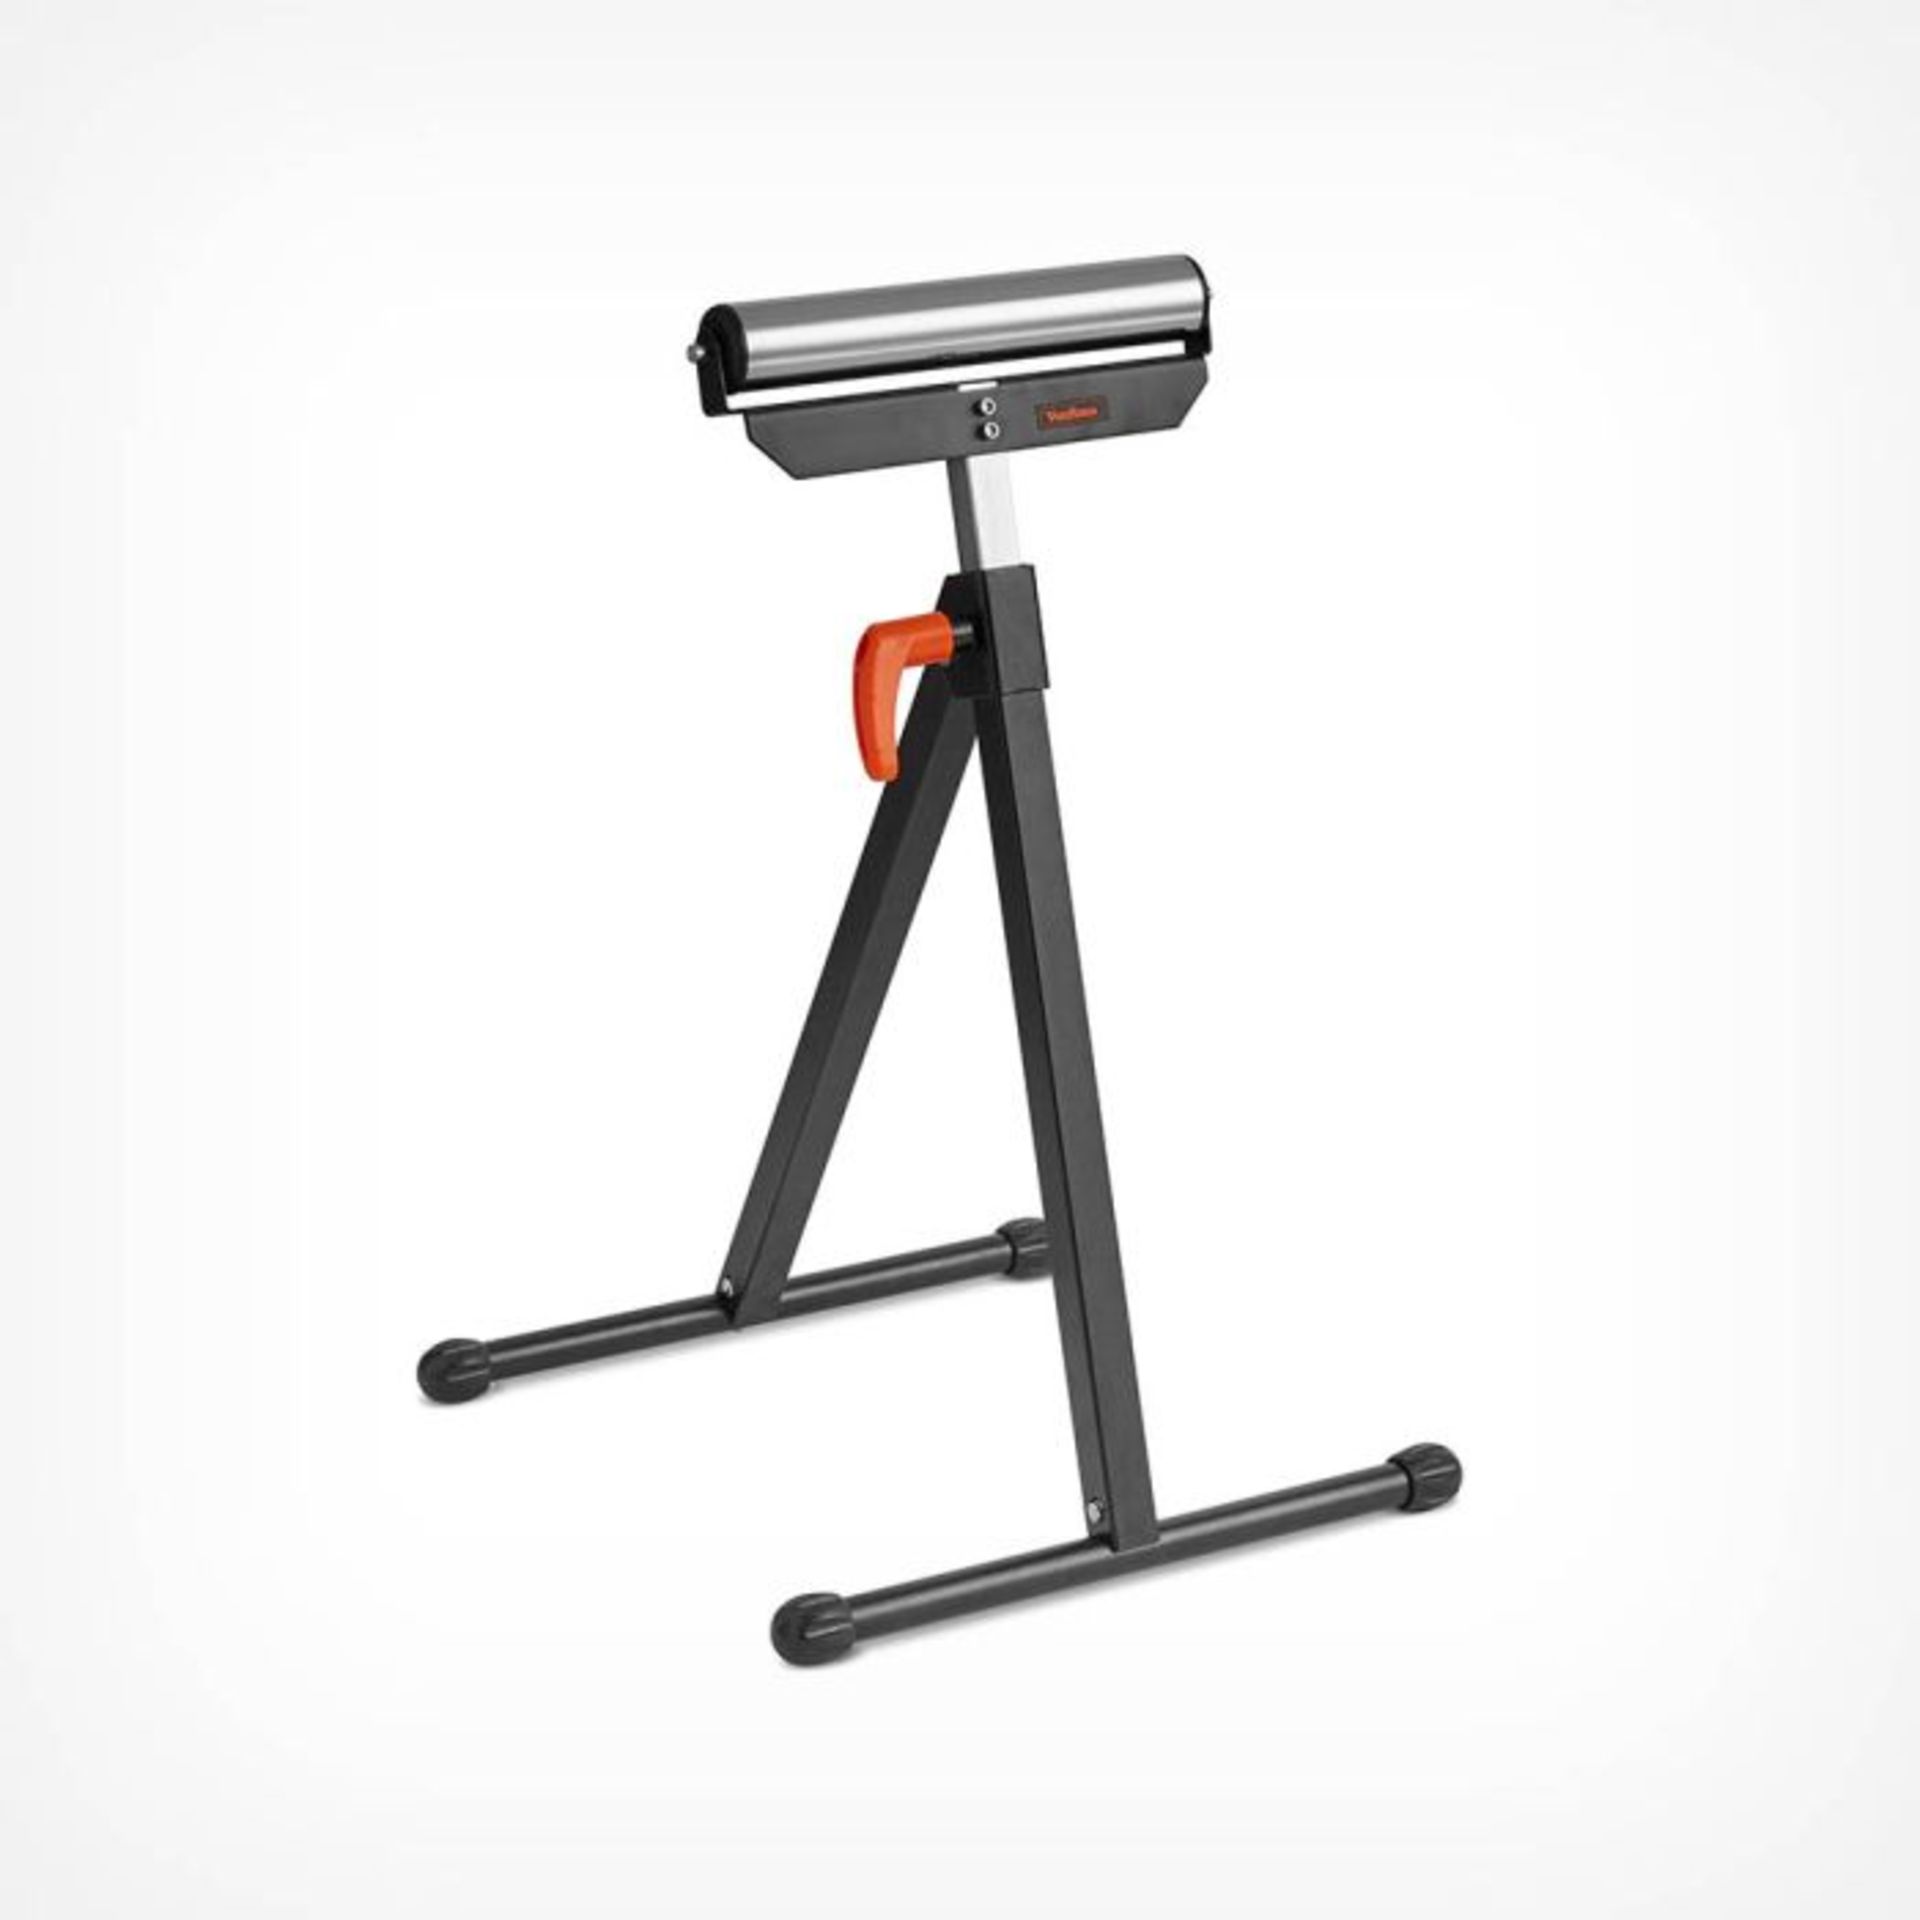 Roller Stand. - ER51. This easy to assemble chrome-plated roller with ultra-durable steel base